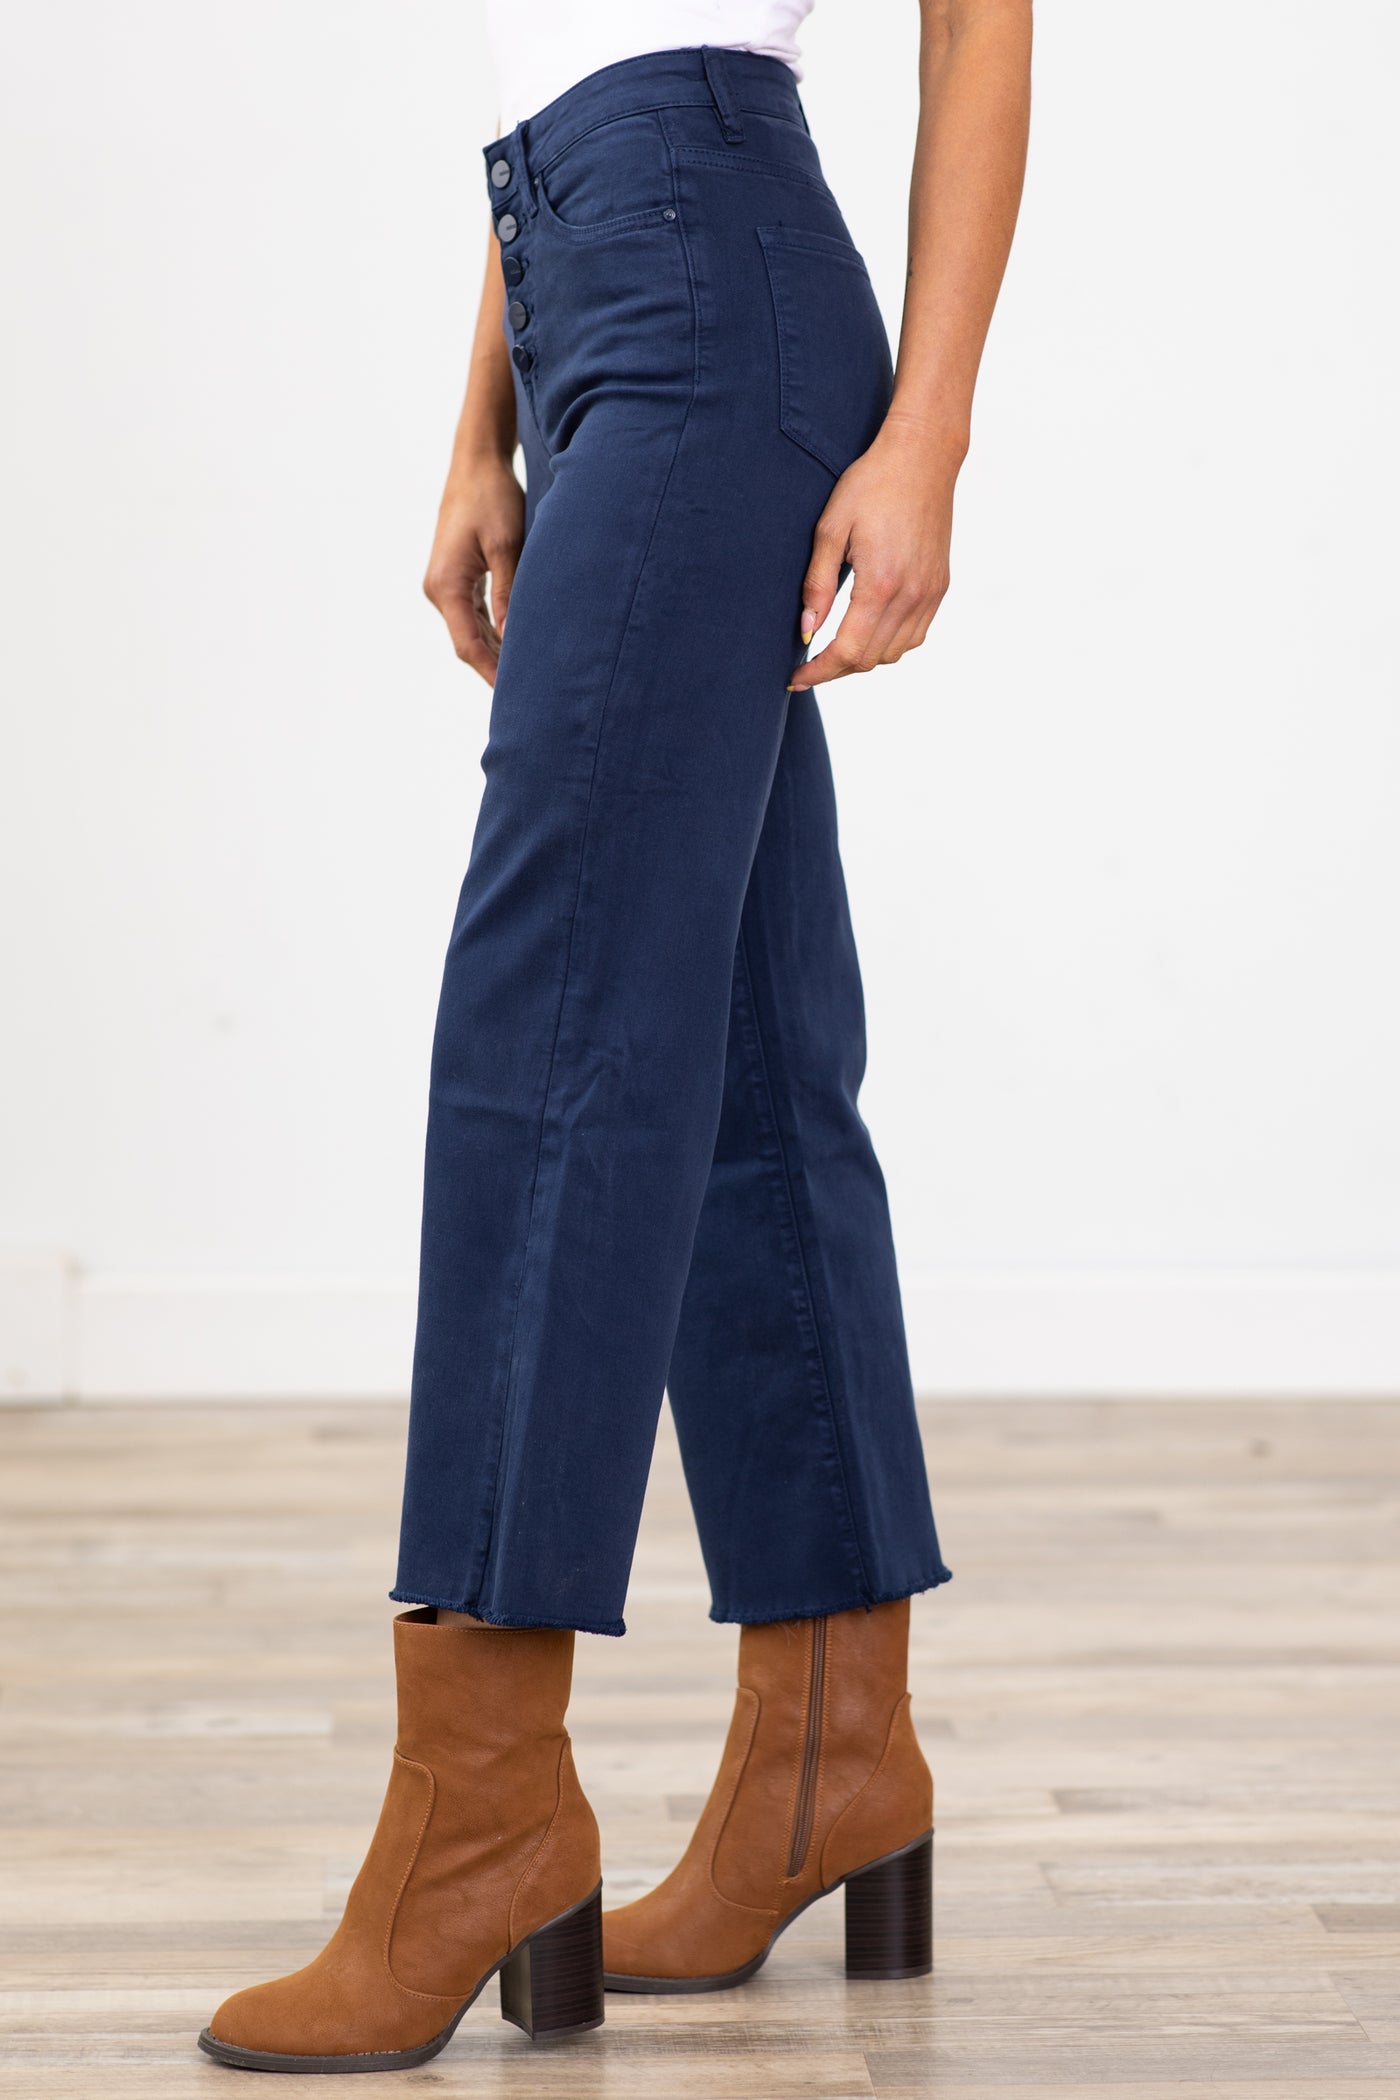 Mica Navy Cropped Wide Leg Jeans